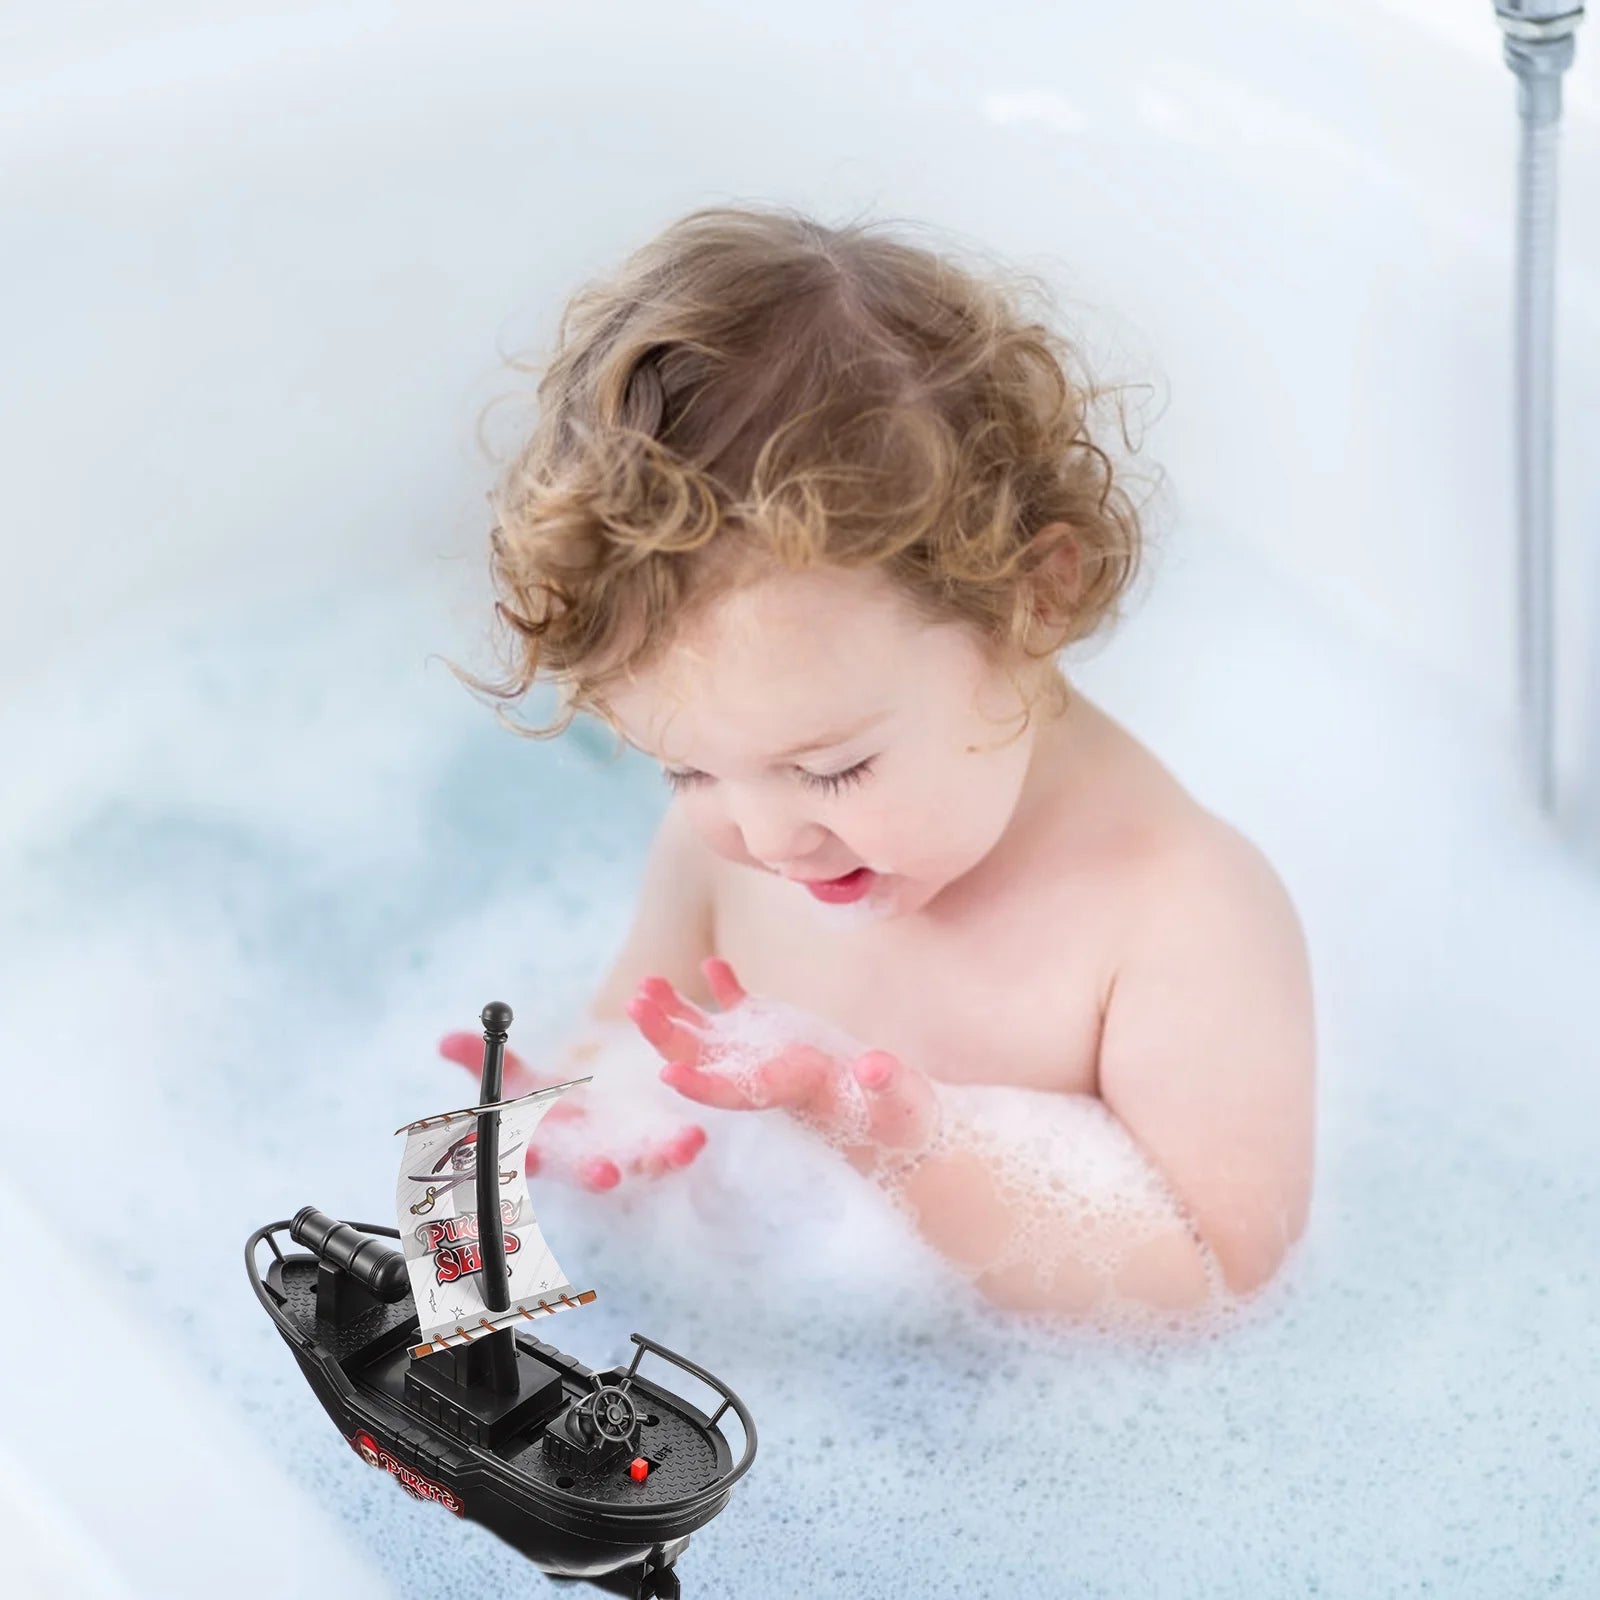 Pirate Ship Bath Toy for Toddlers and Kids with RC Carrier - ToylandEU